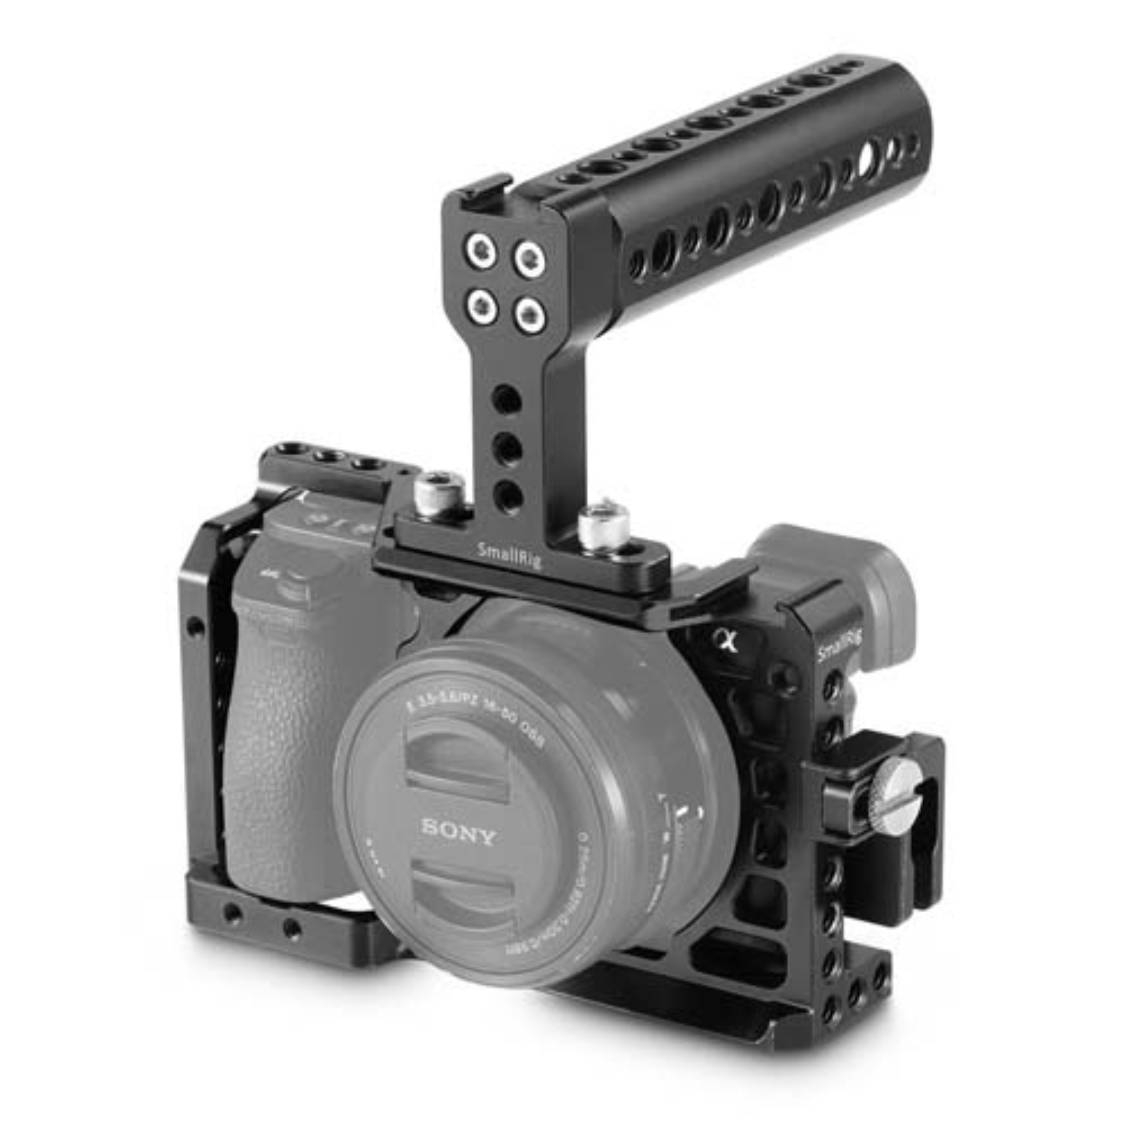 SmallRig Sony A6500/A6300 Cage and Accessory Kit